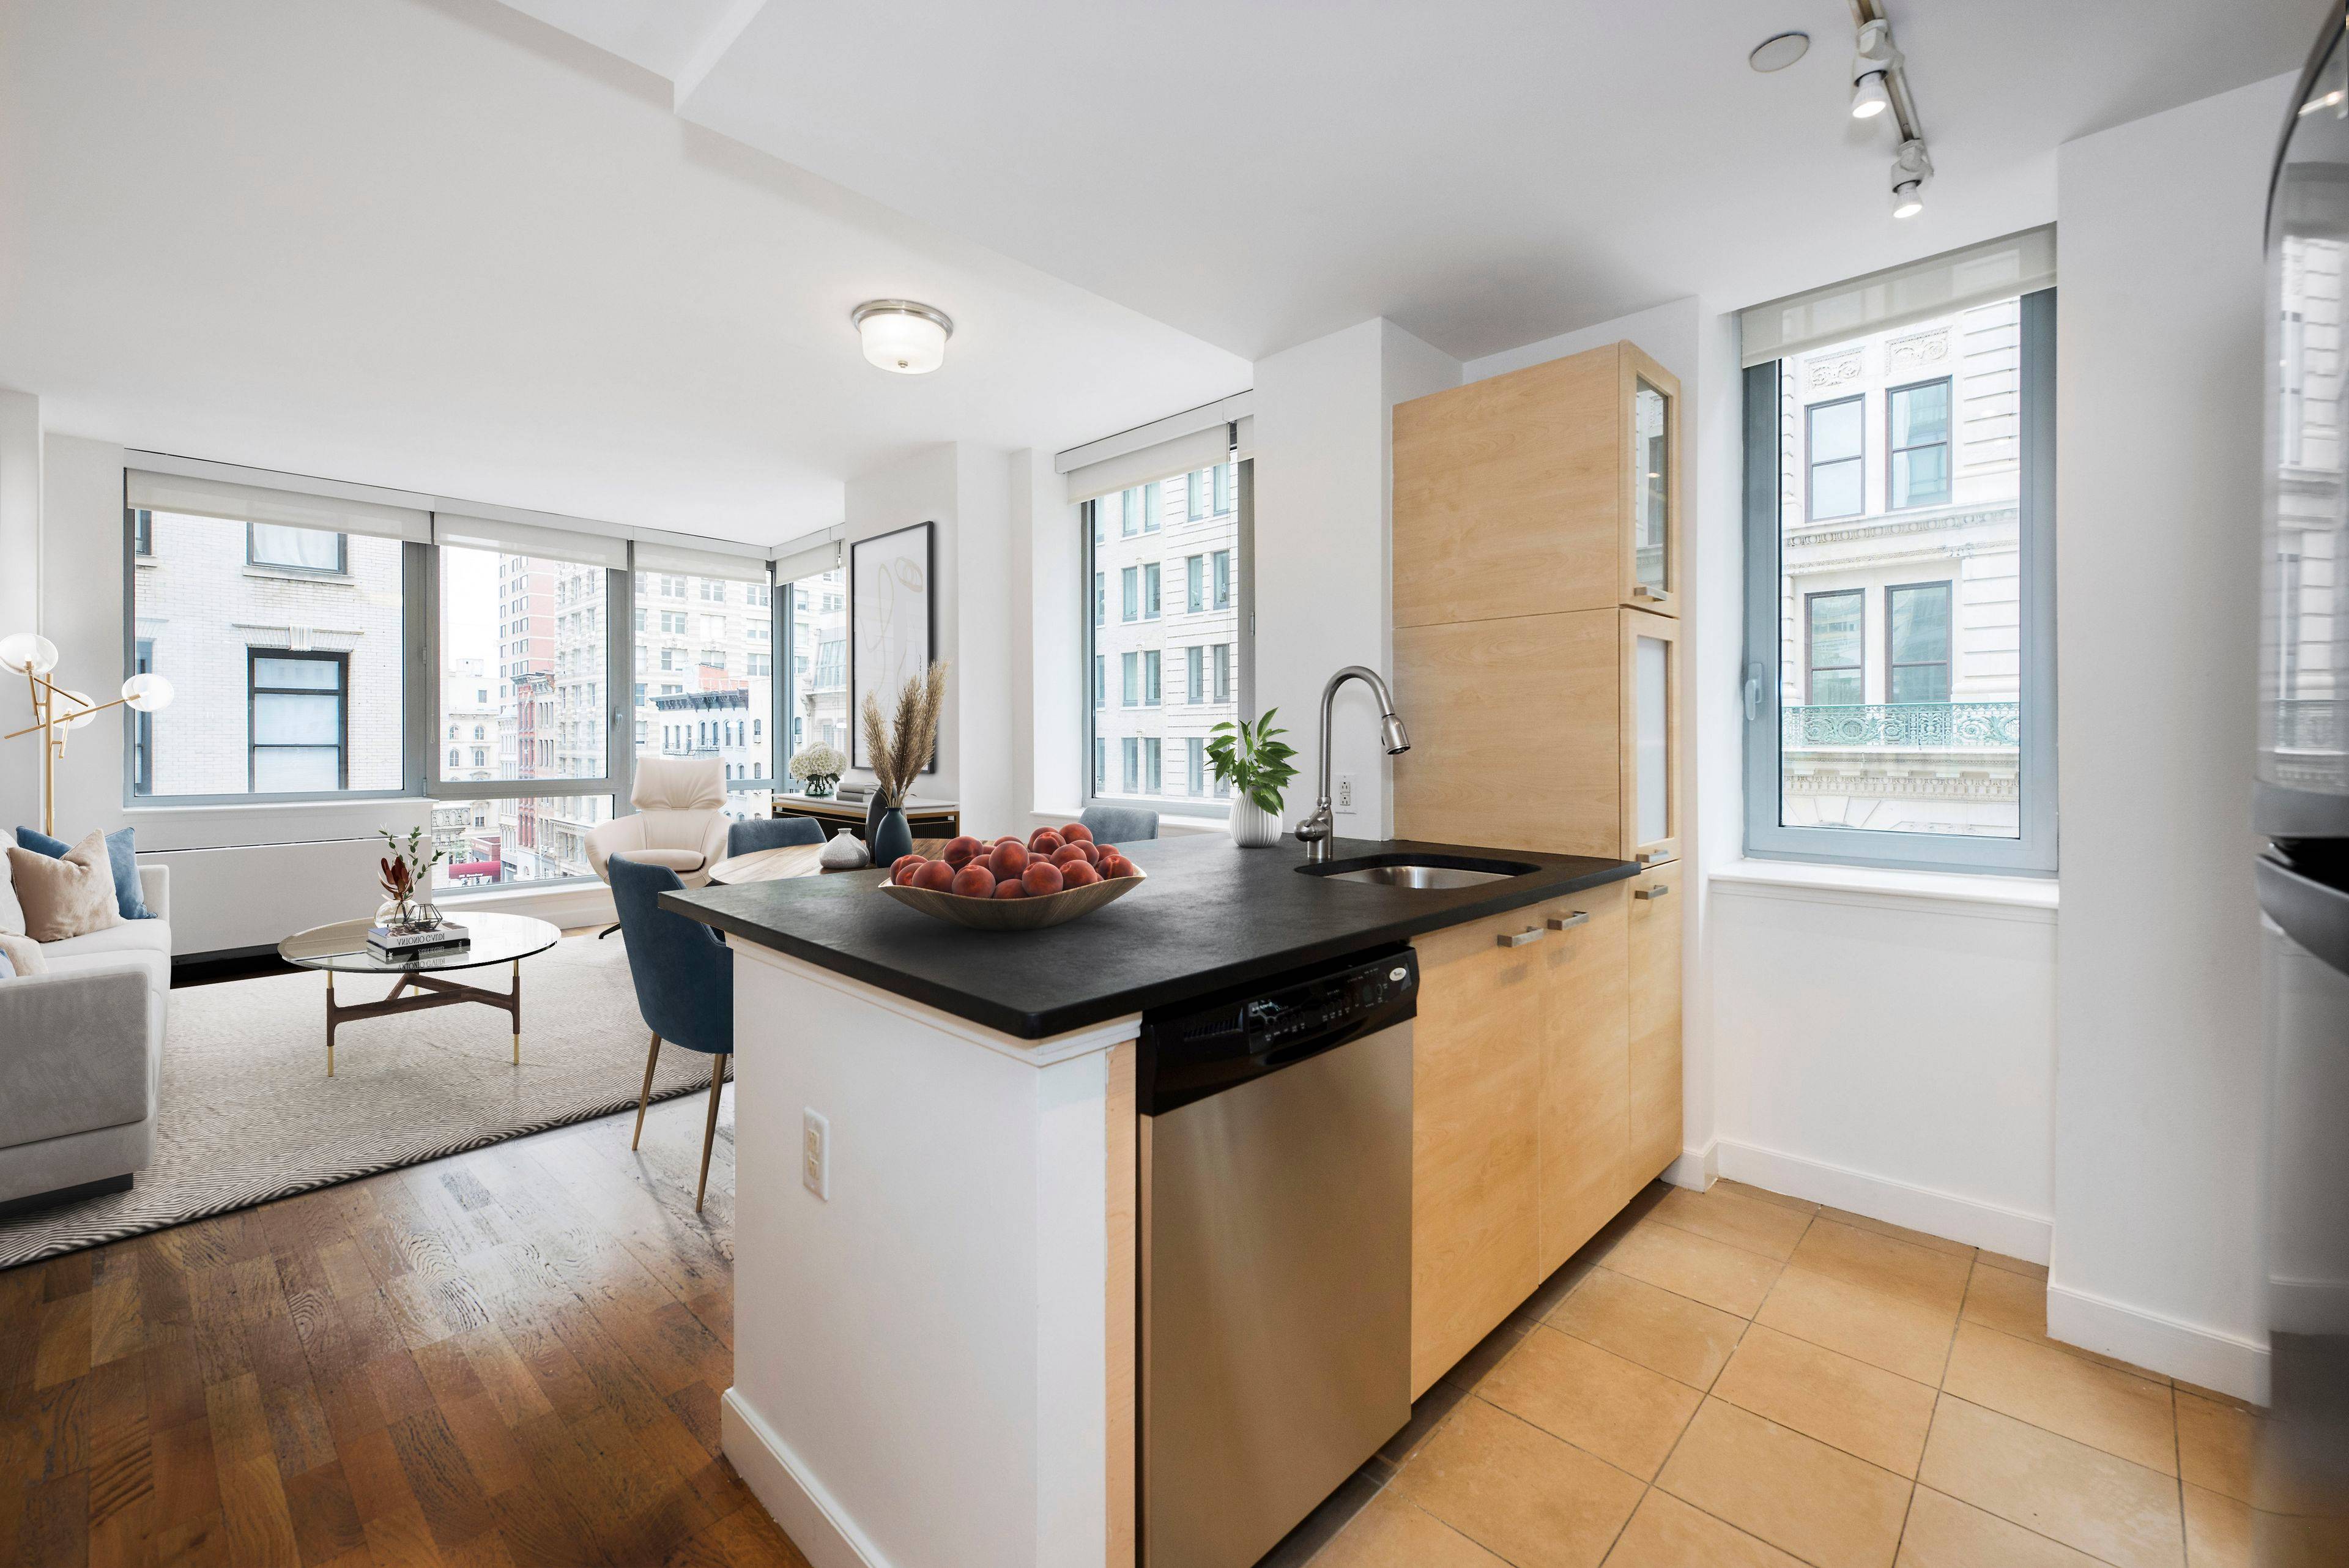 Sprawling, light filled, 1 bedroom with corner floor to ceiling living room windows, a windowed gourmet kitchen with stainless steel appliances, honed concrete tile floors, and granite countertops.